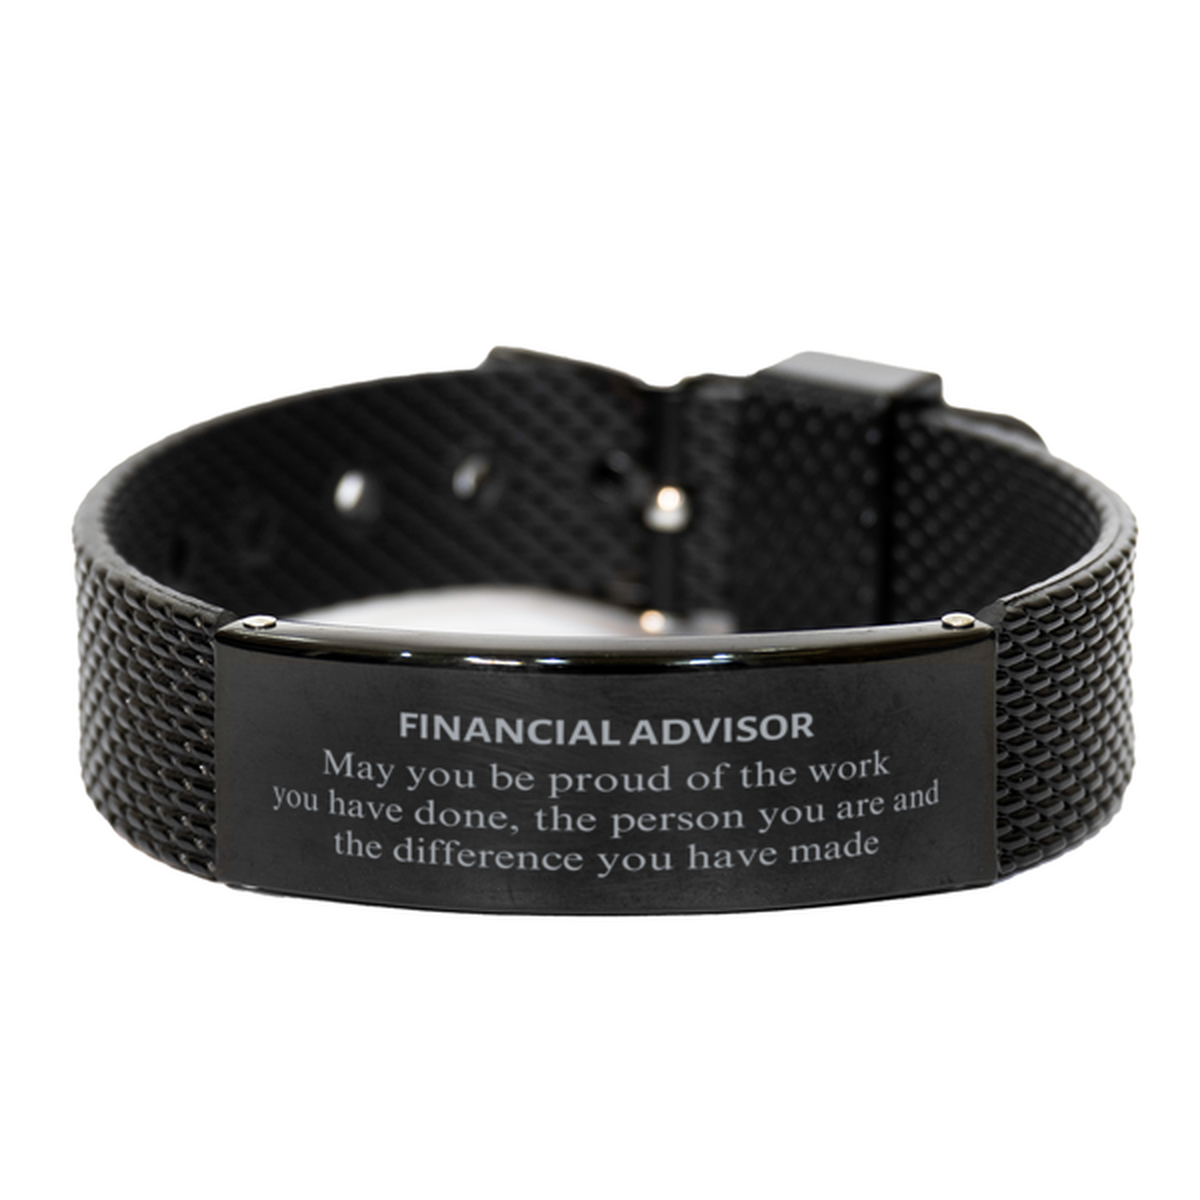 Financial Advisor May you be proud of the work you have done, Retirement Financial Advisor Black Shark Mesh Bracelet for Colleague Appreciation Gifts Amazing for Financial Advisor